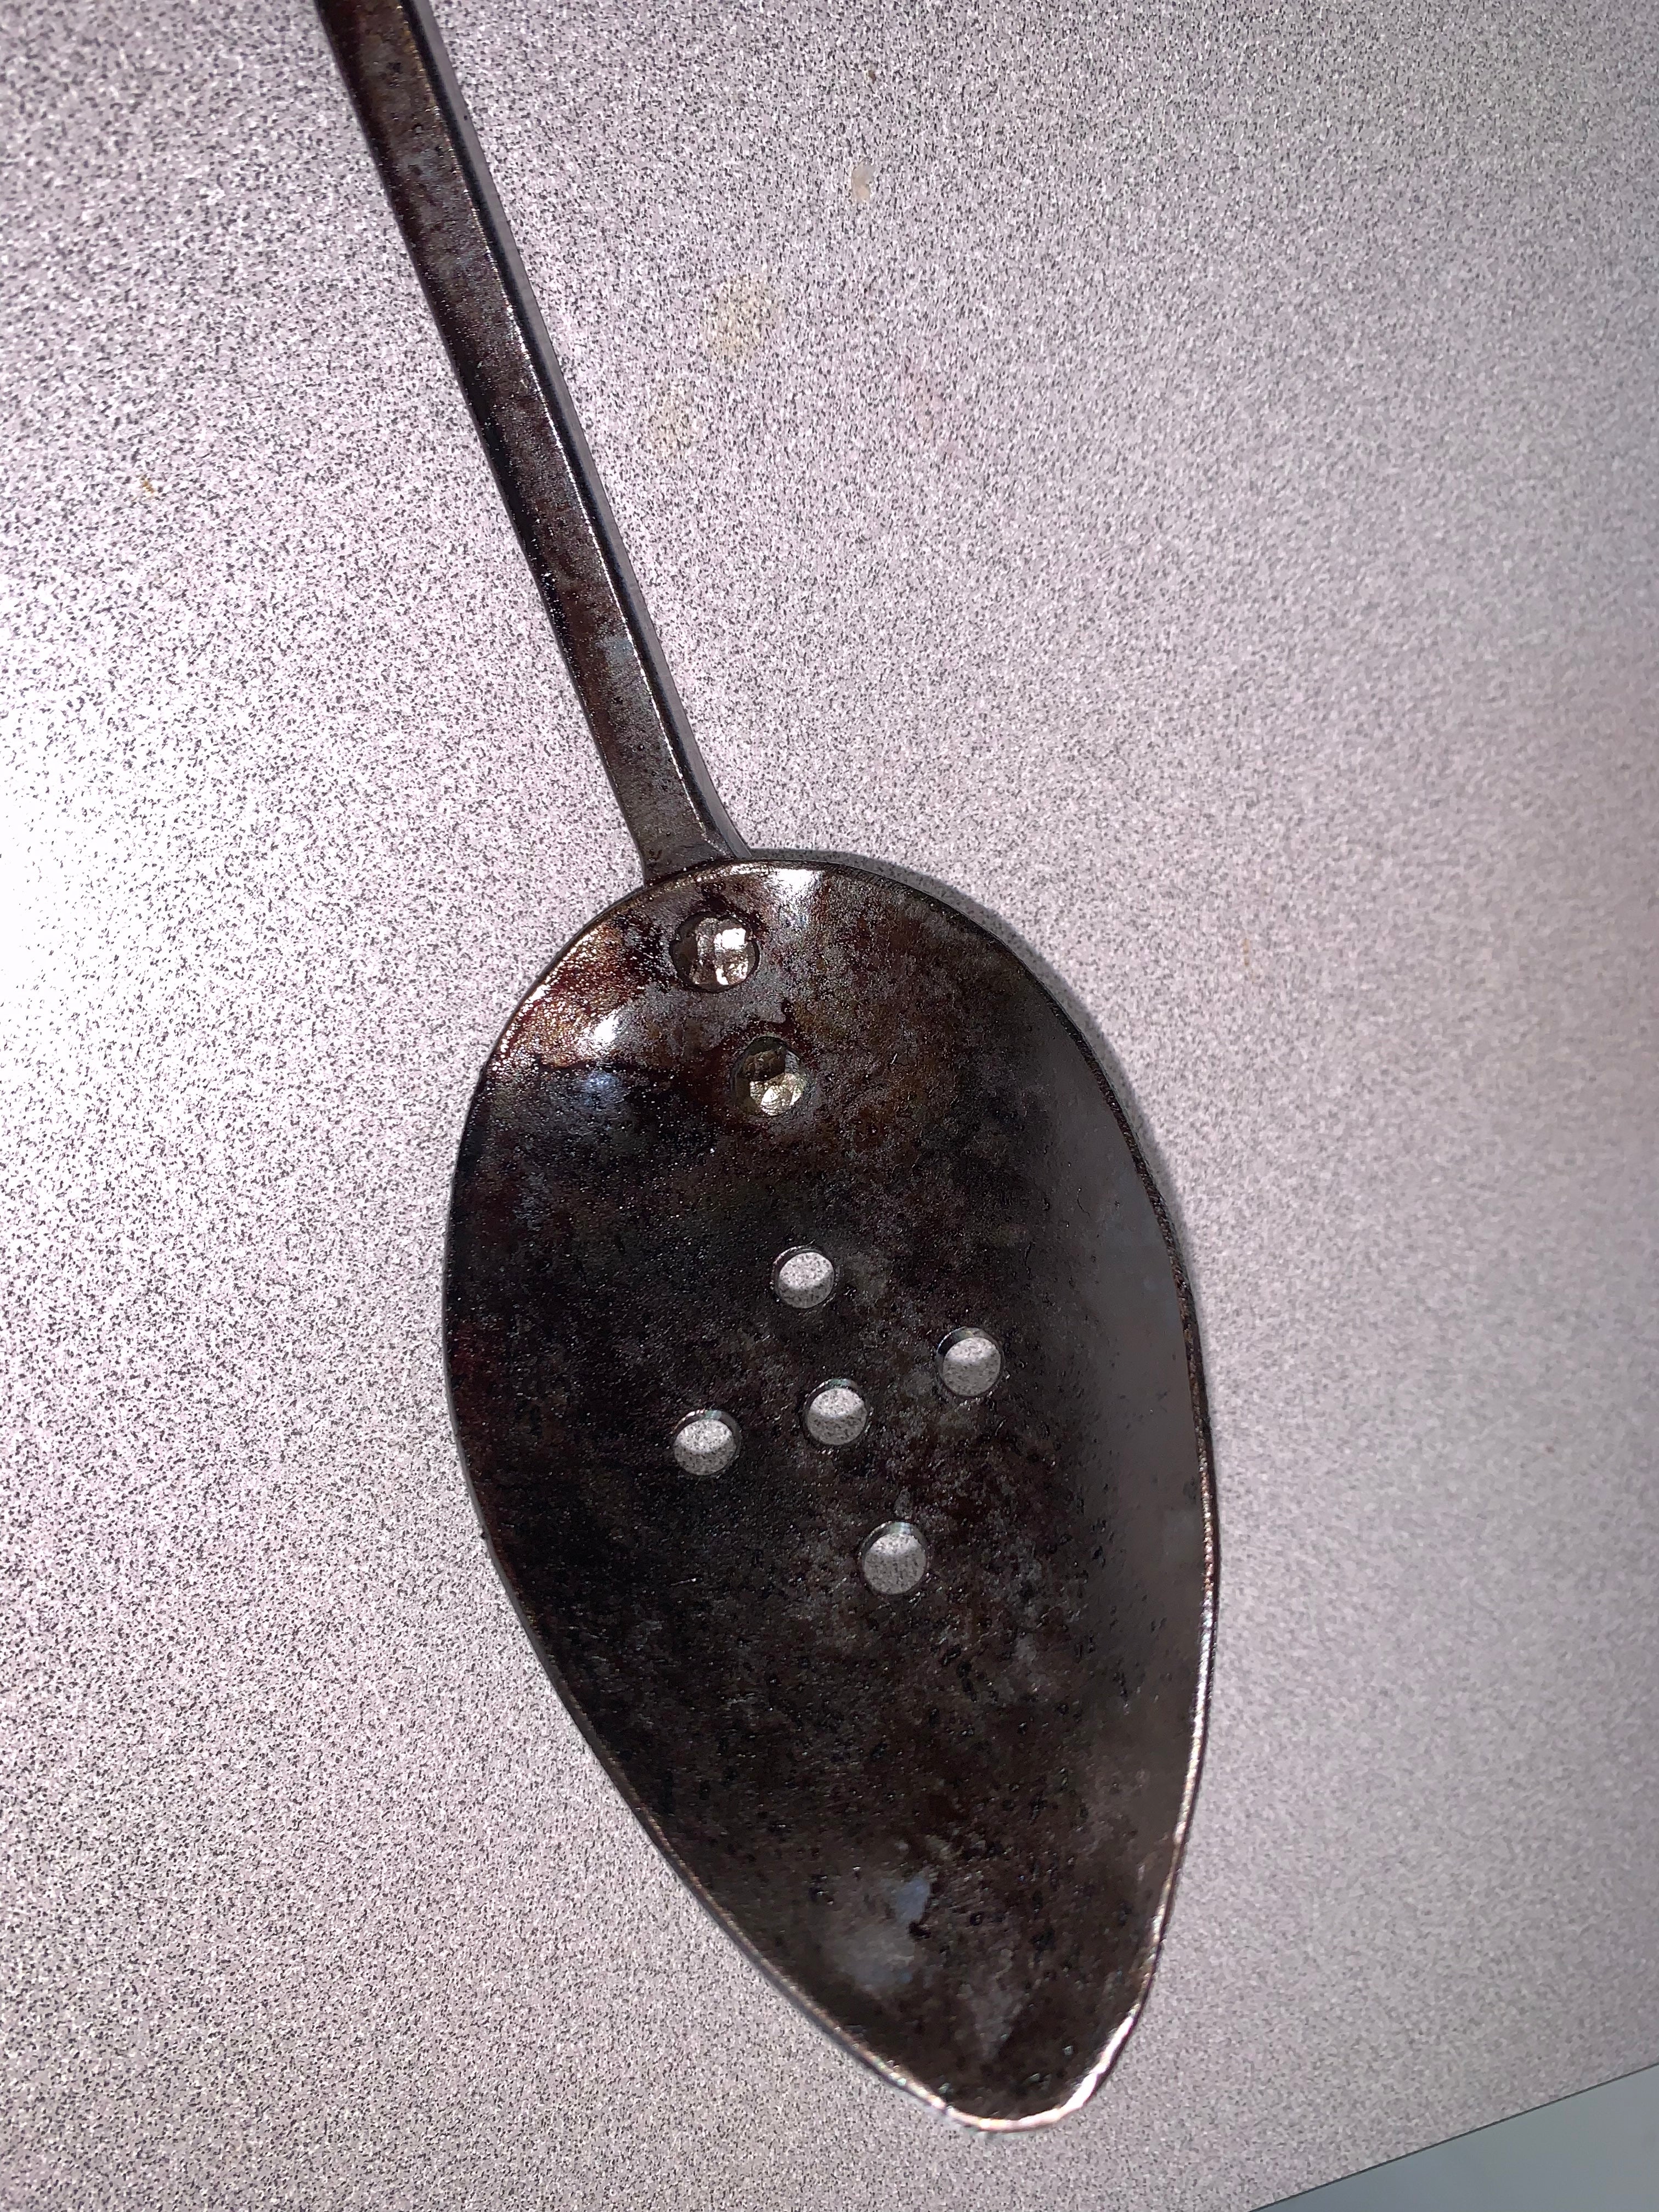 Slotted Spoon (long handled)